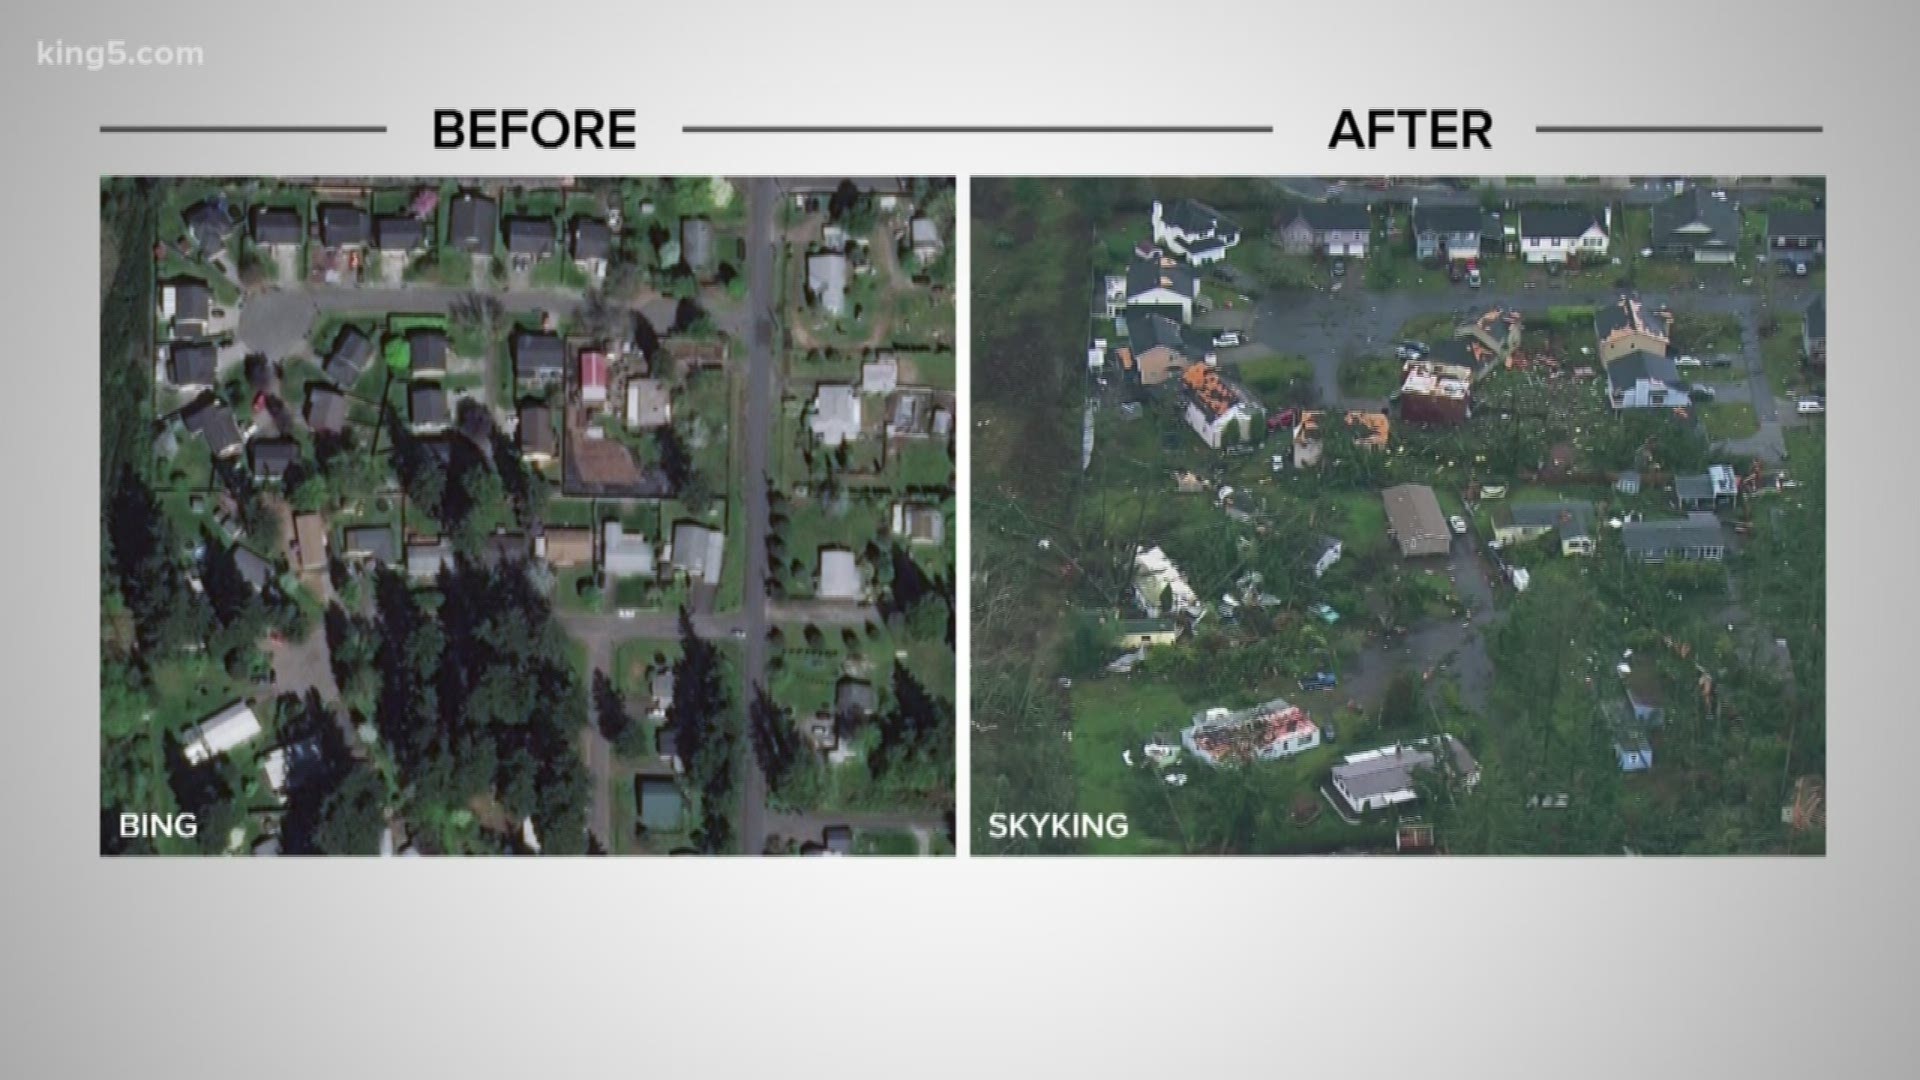 Port Orchard before and after tornado strikes.